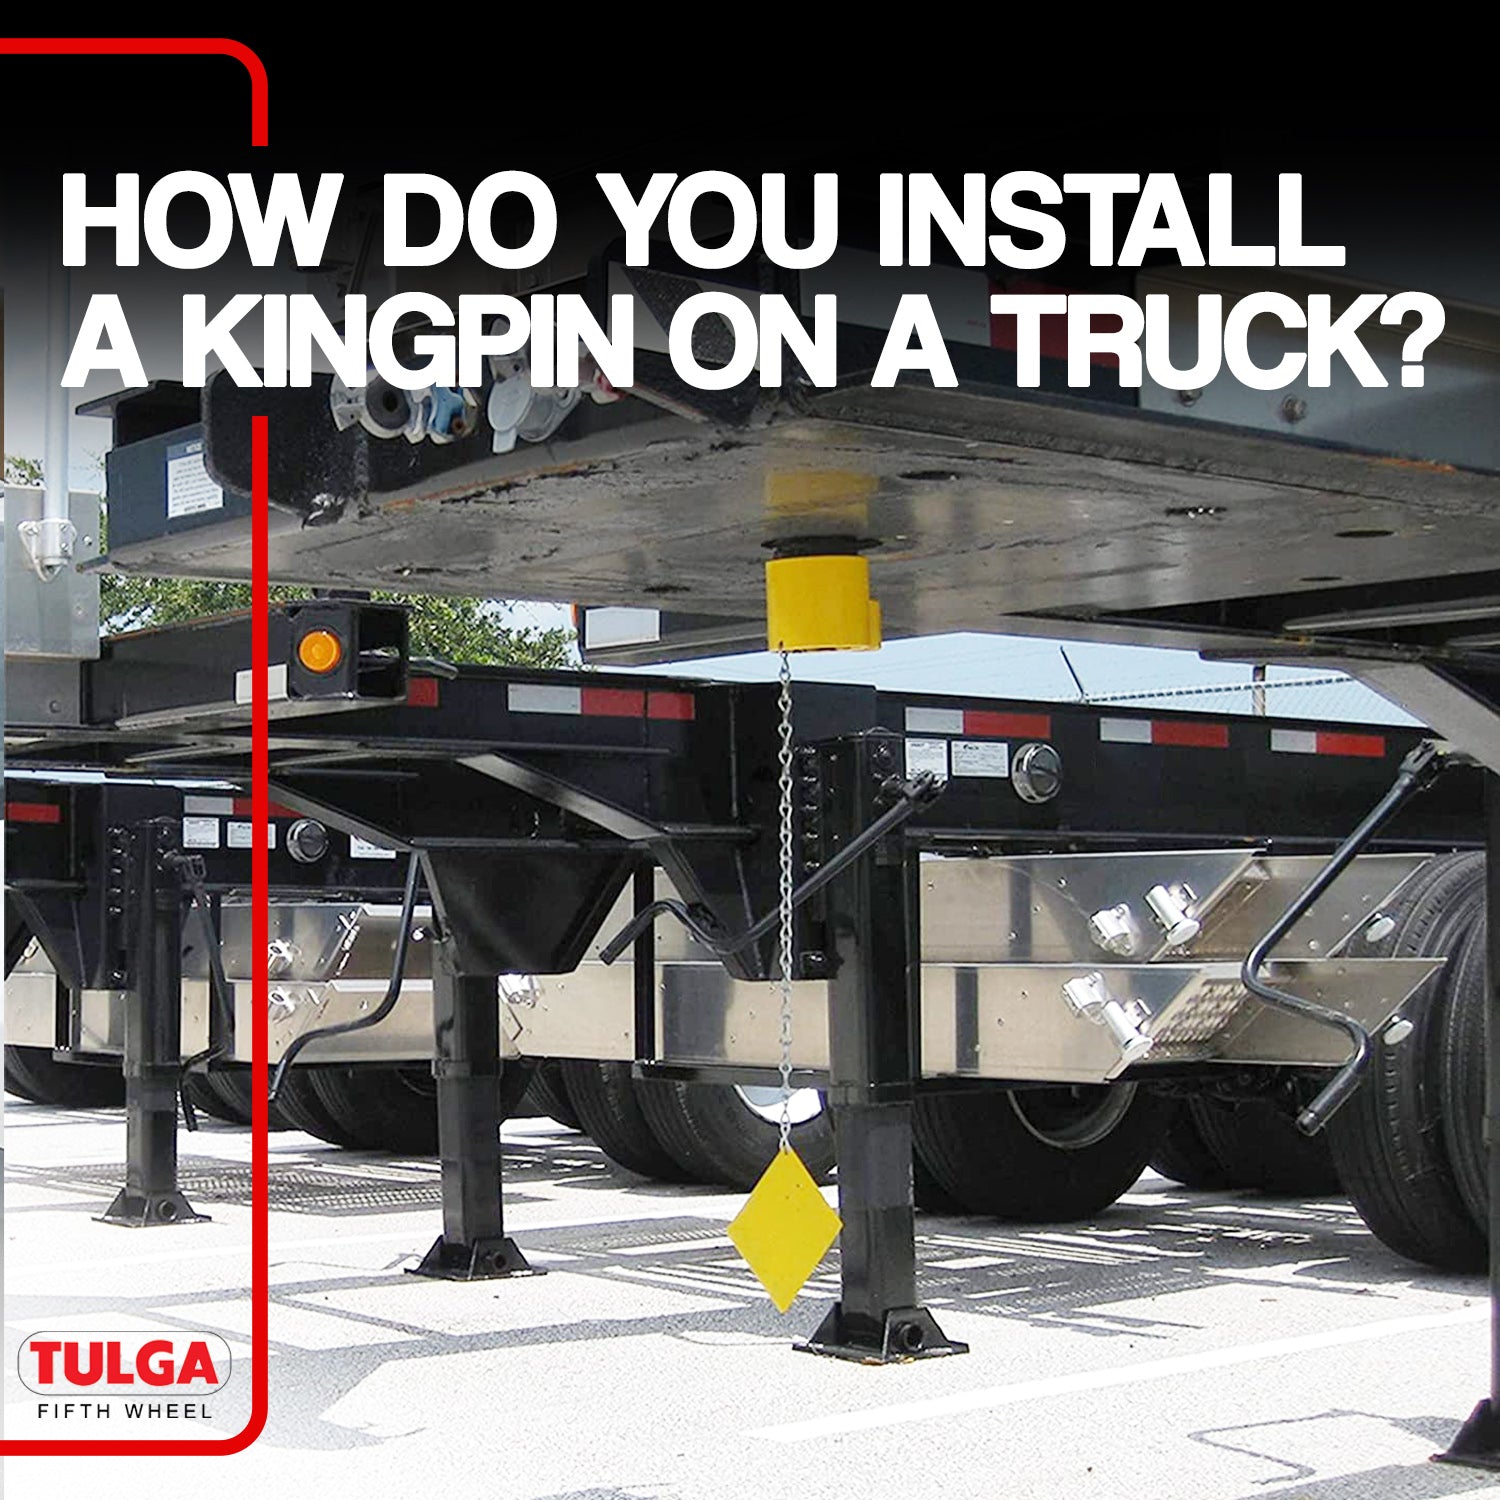 How do you install a kingpin on a truck?